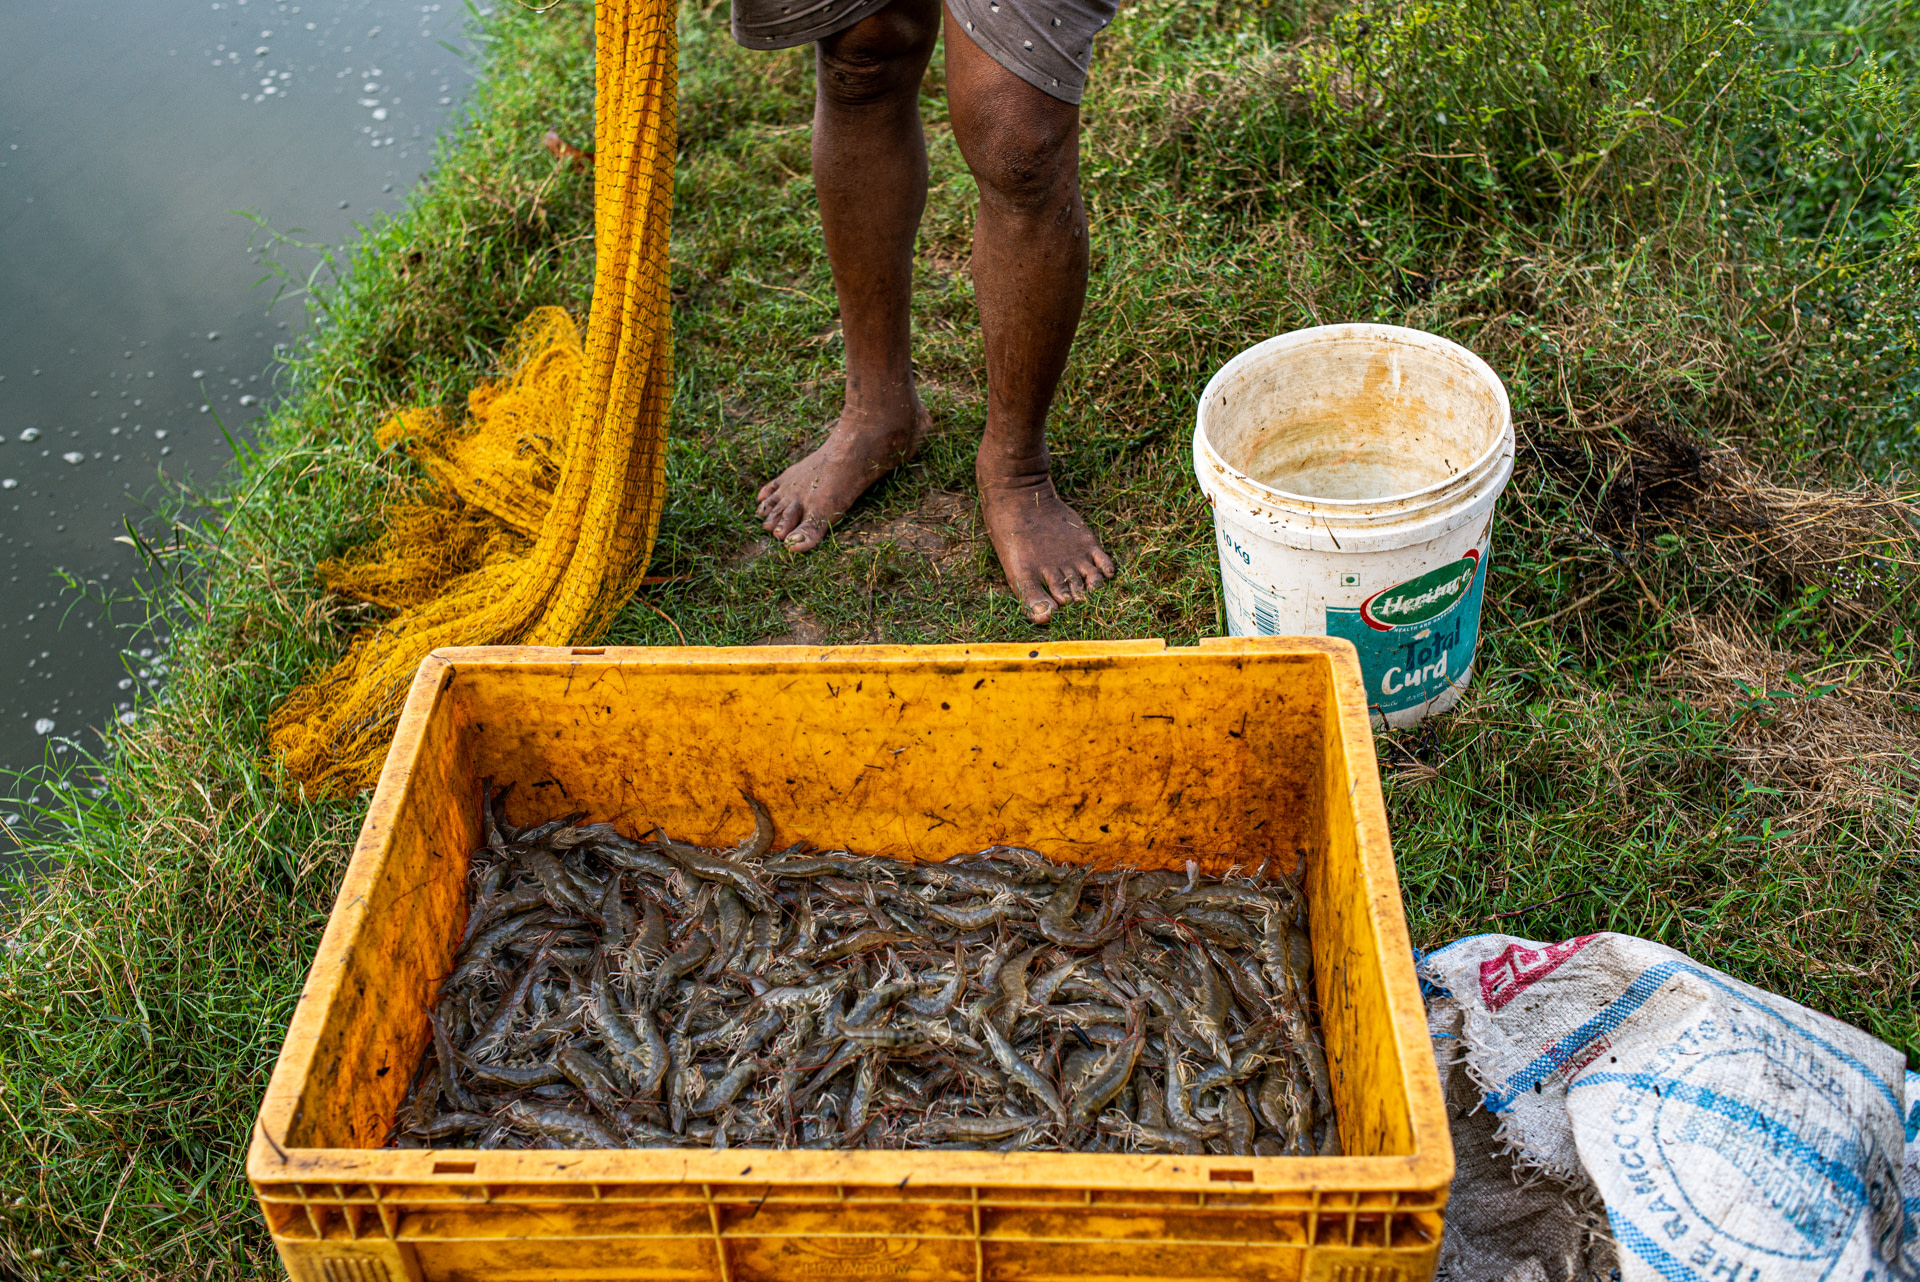 An aquafarm worker stands by a crate of harvested shrimps and prawns. The worker prepares a net before using it again to harvest more animals from the pond. Matlapalem, Andhra Pradesh, India, 2022. S. Chakrabarti / We Animals Media